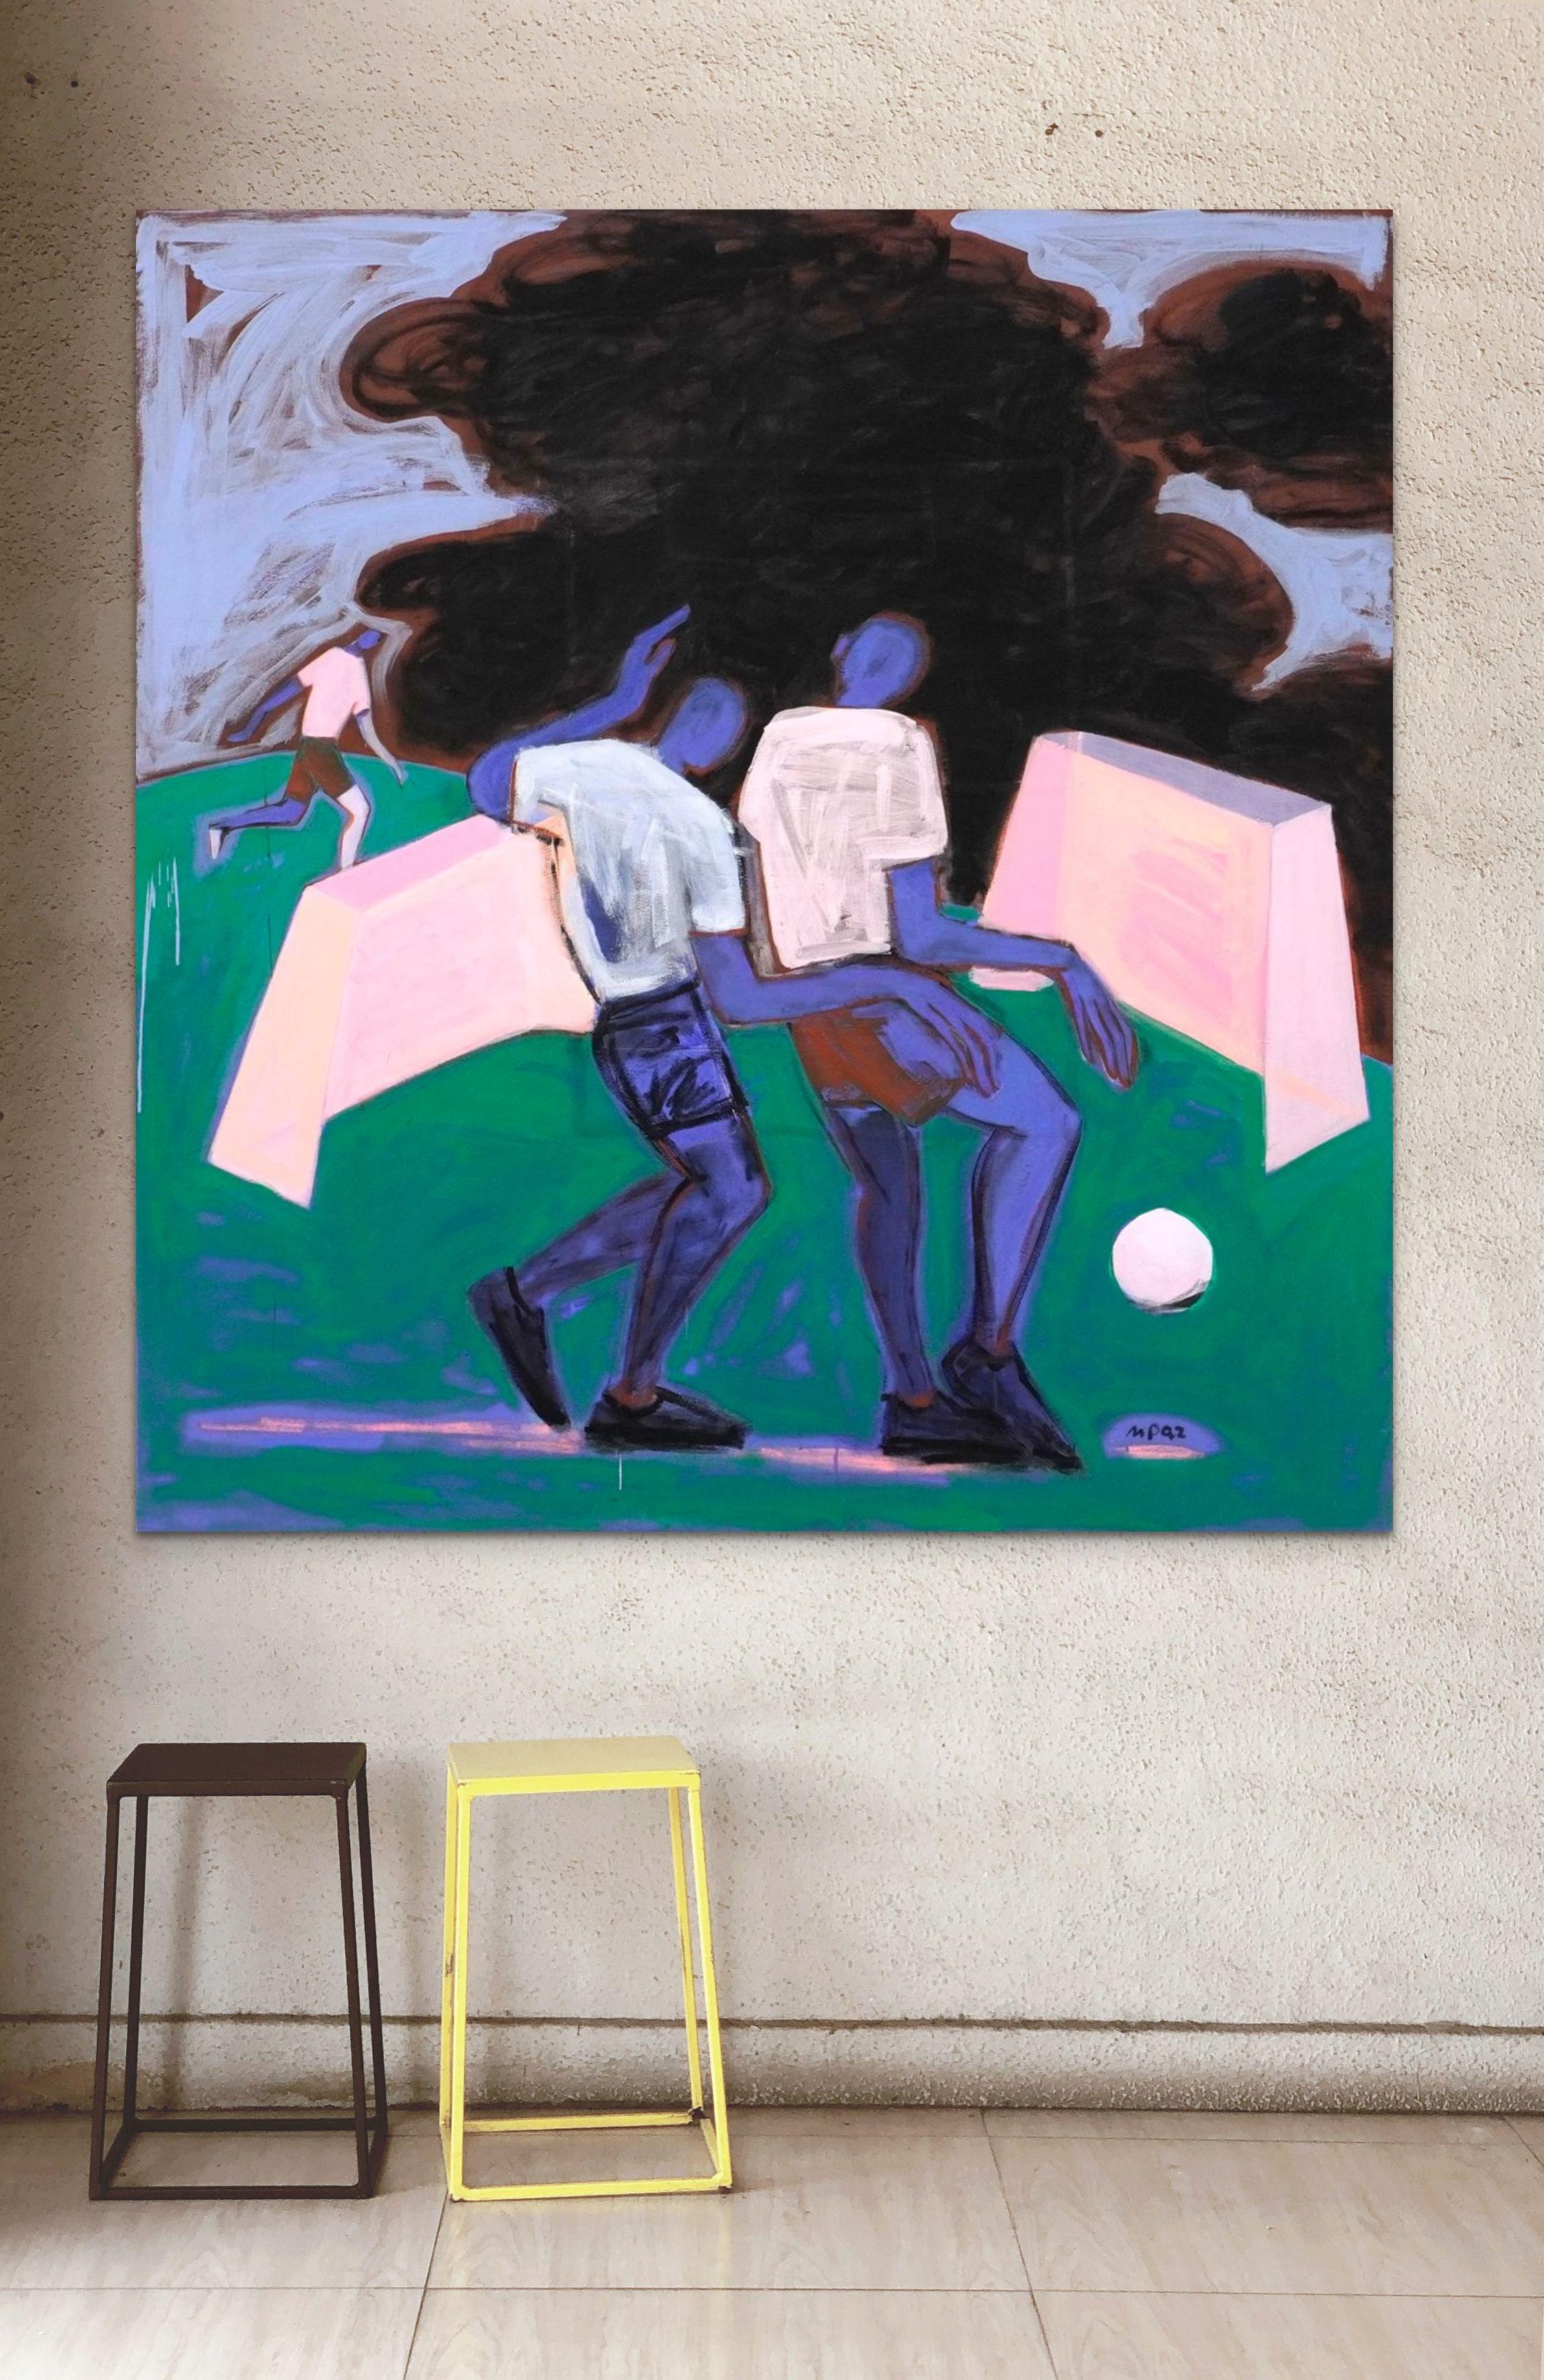  Black clouds in the sky, but not so many like before; Abstract, Soccer Painting For Sale 4